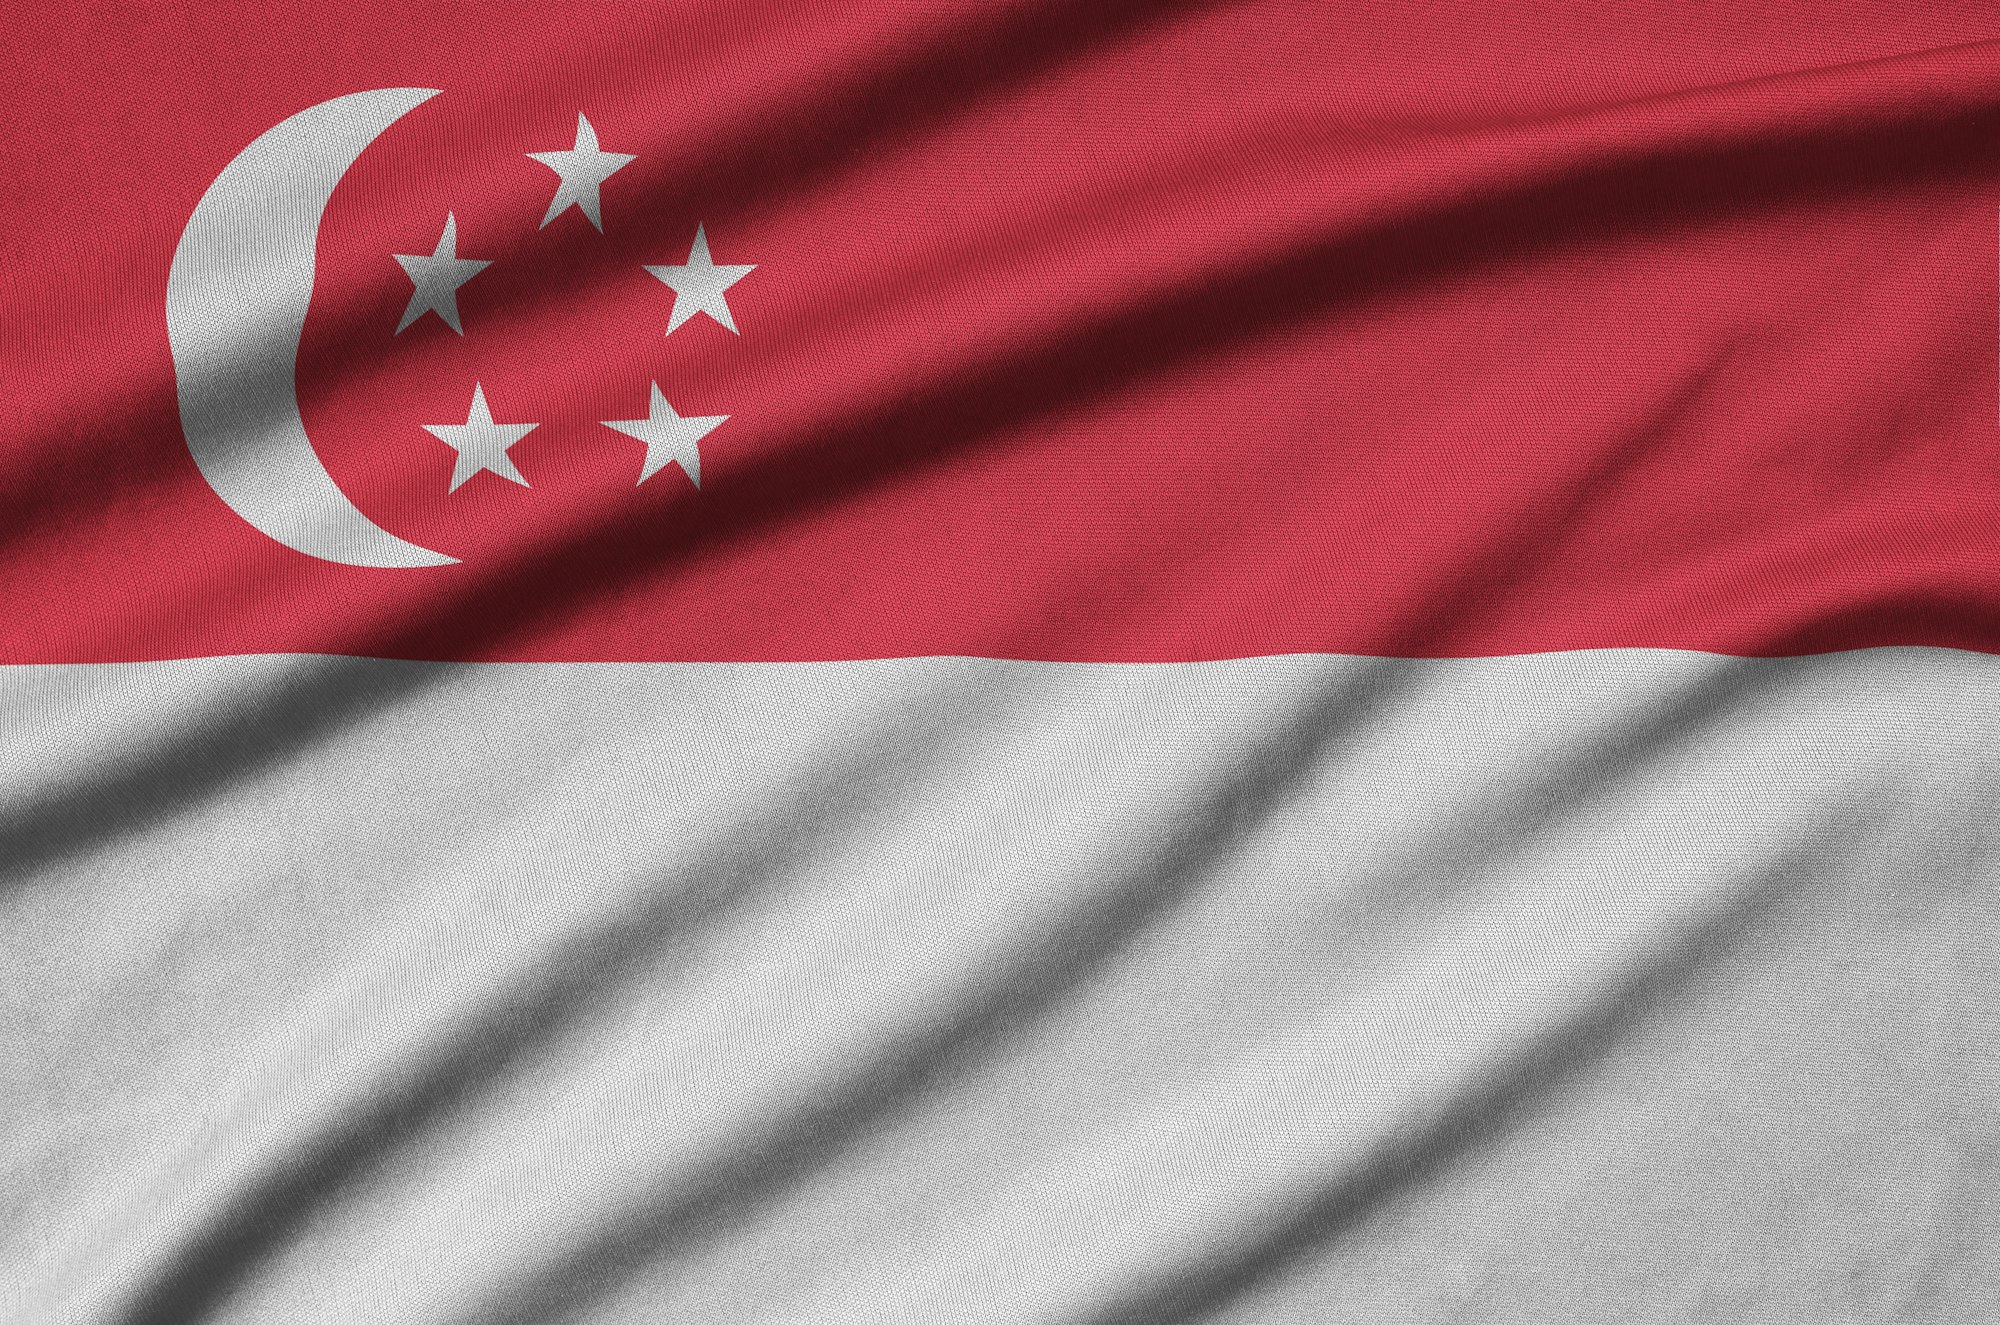 Singapore flag is depicted on a sports cloth fabric with many folds. Sport team waving banner